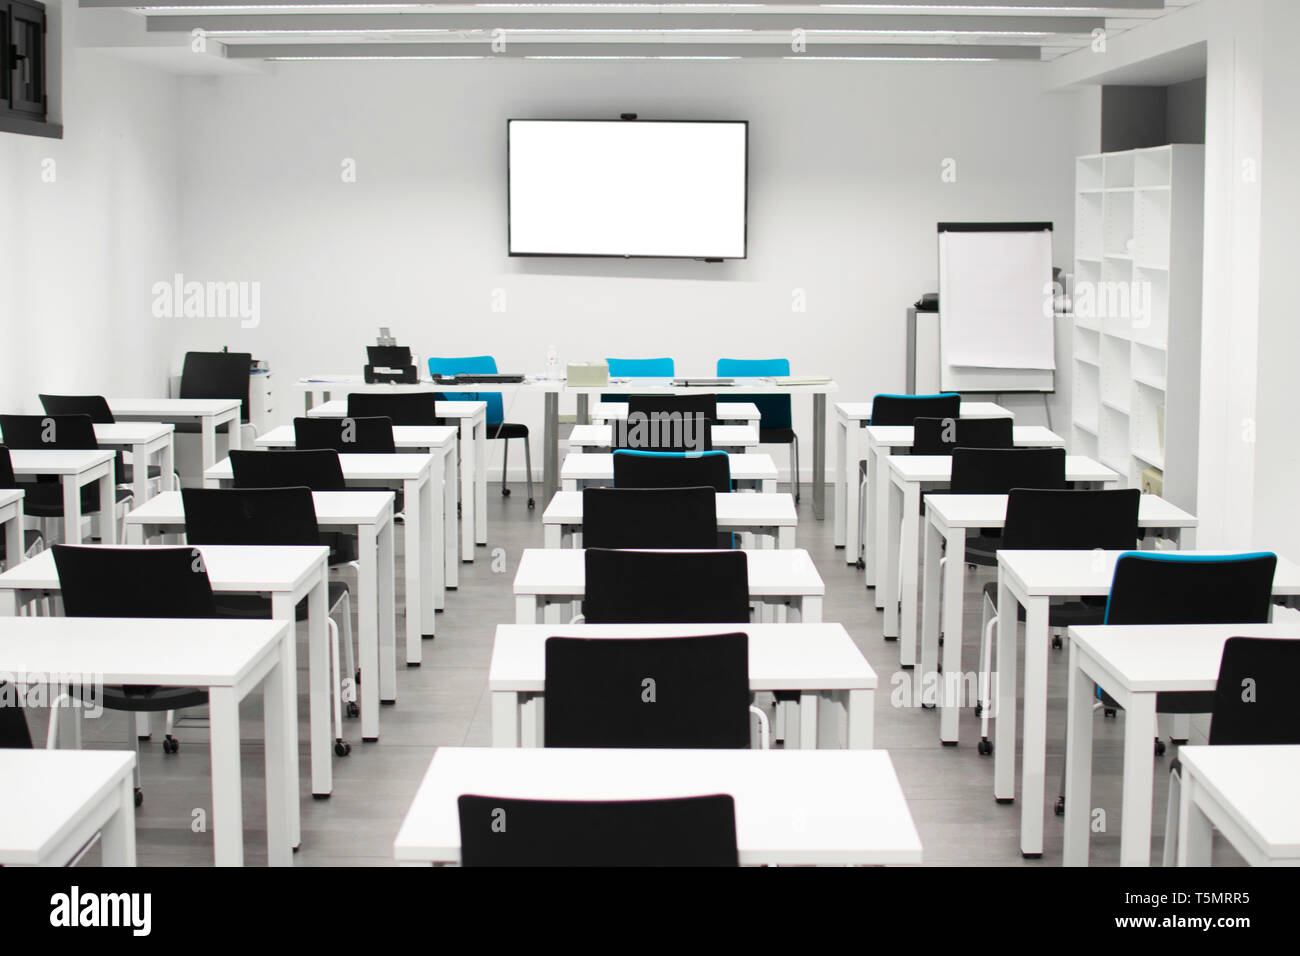 Classroom empty. High school or university desk or table and chairs in a row. Exam test room. Projecting digital blackboard Stock Photo